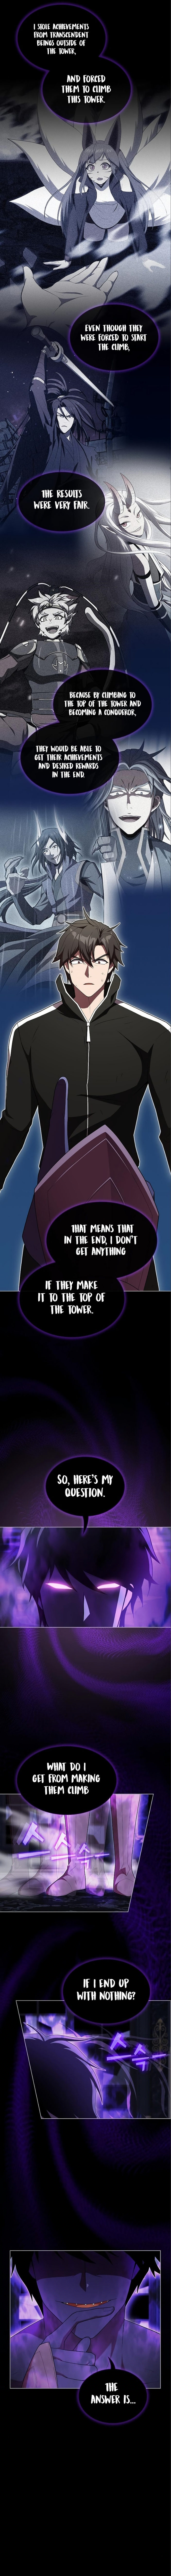 The Tutorial Tower of the Advanced Player - Chapter 154 Page 6